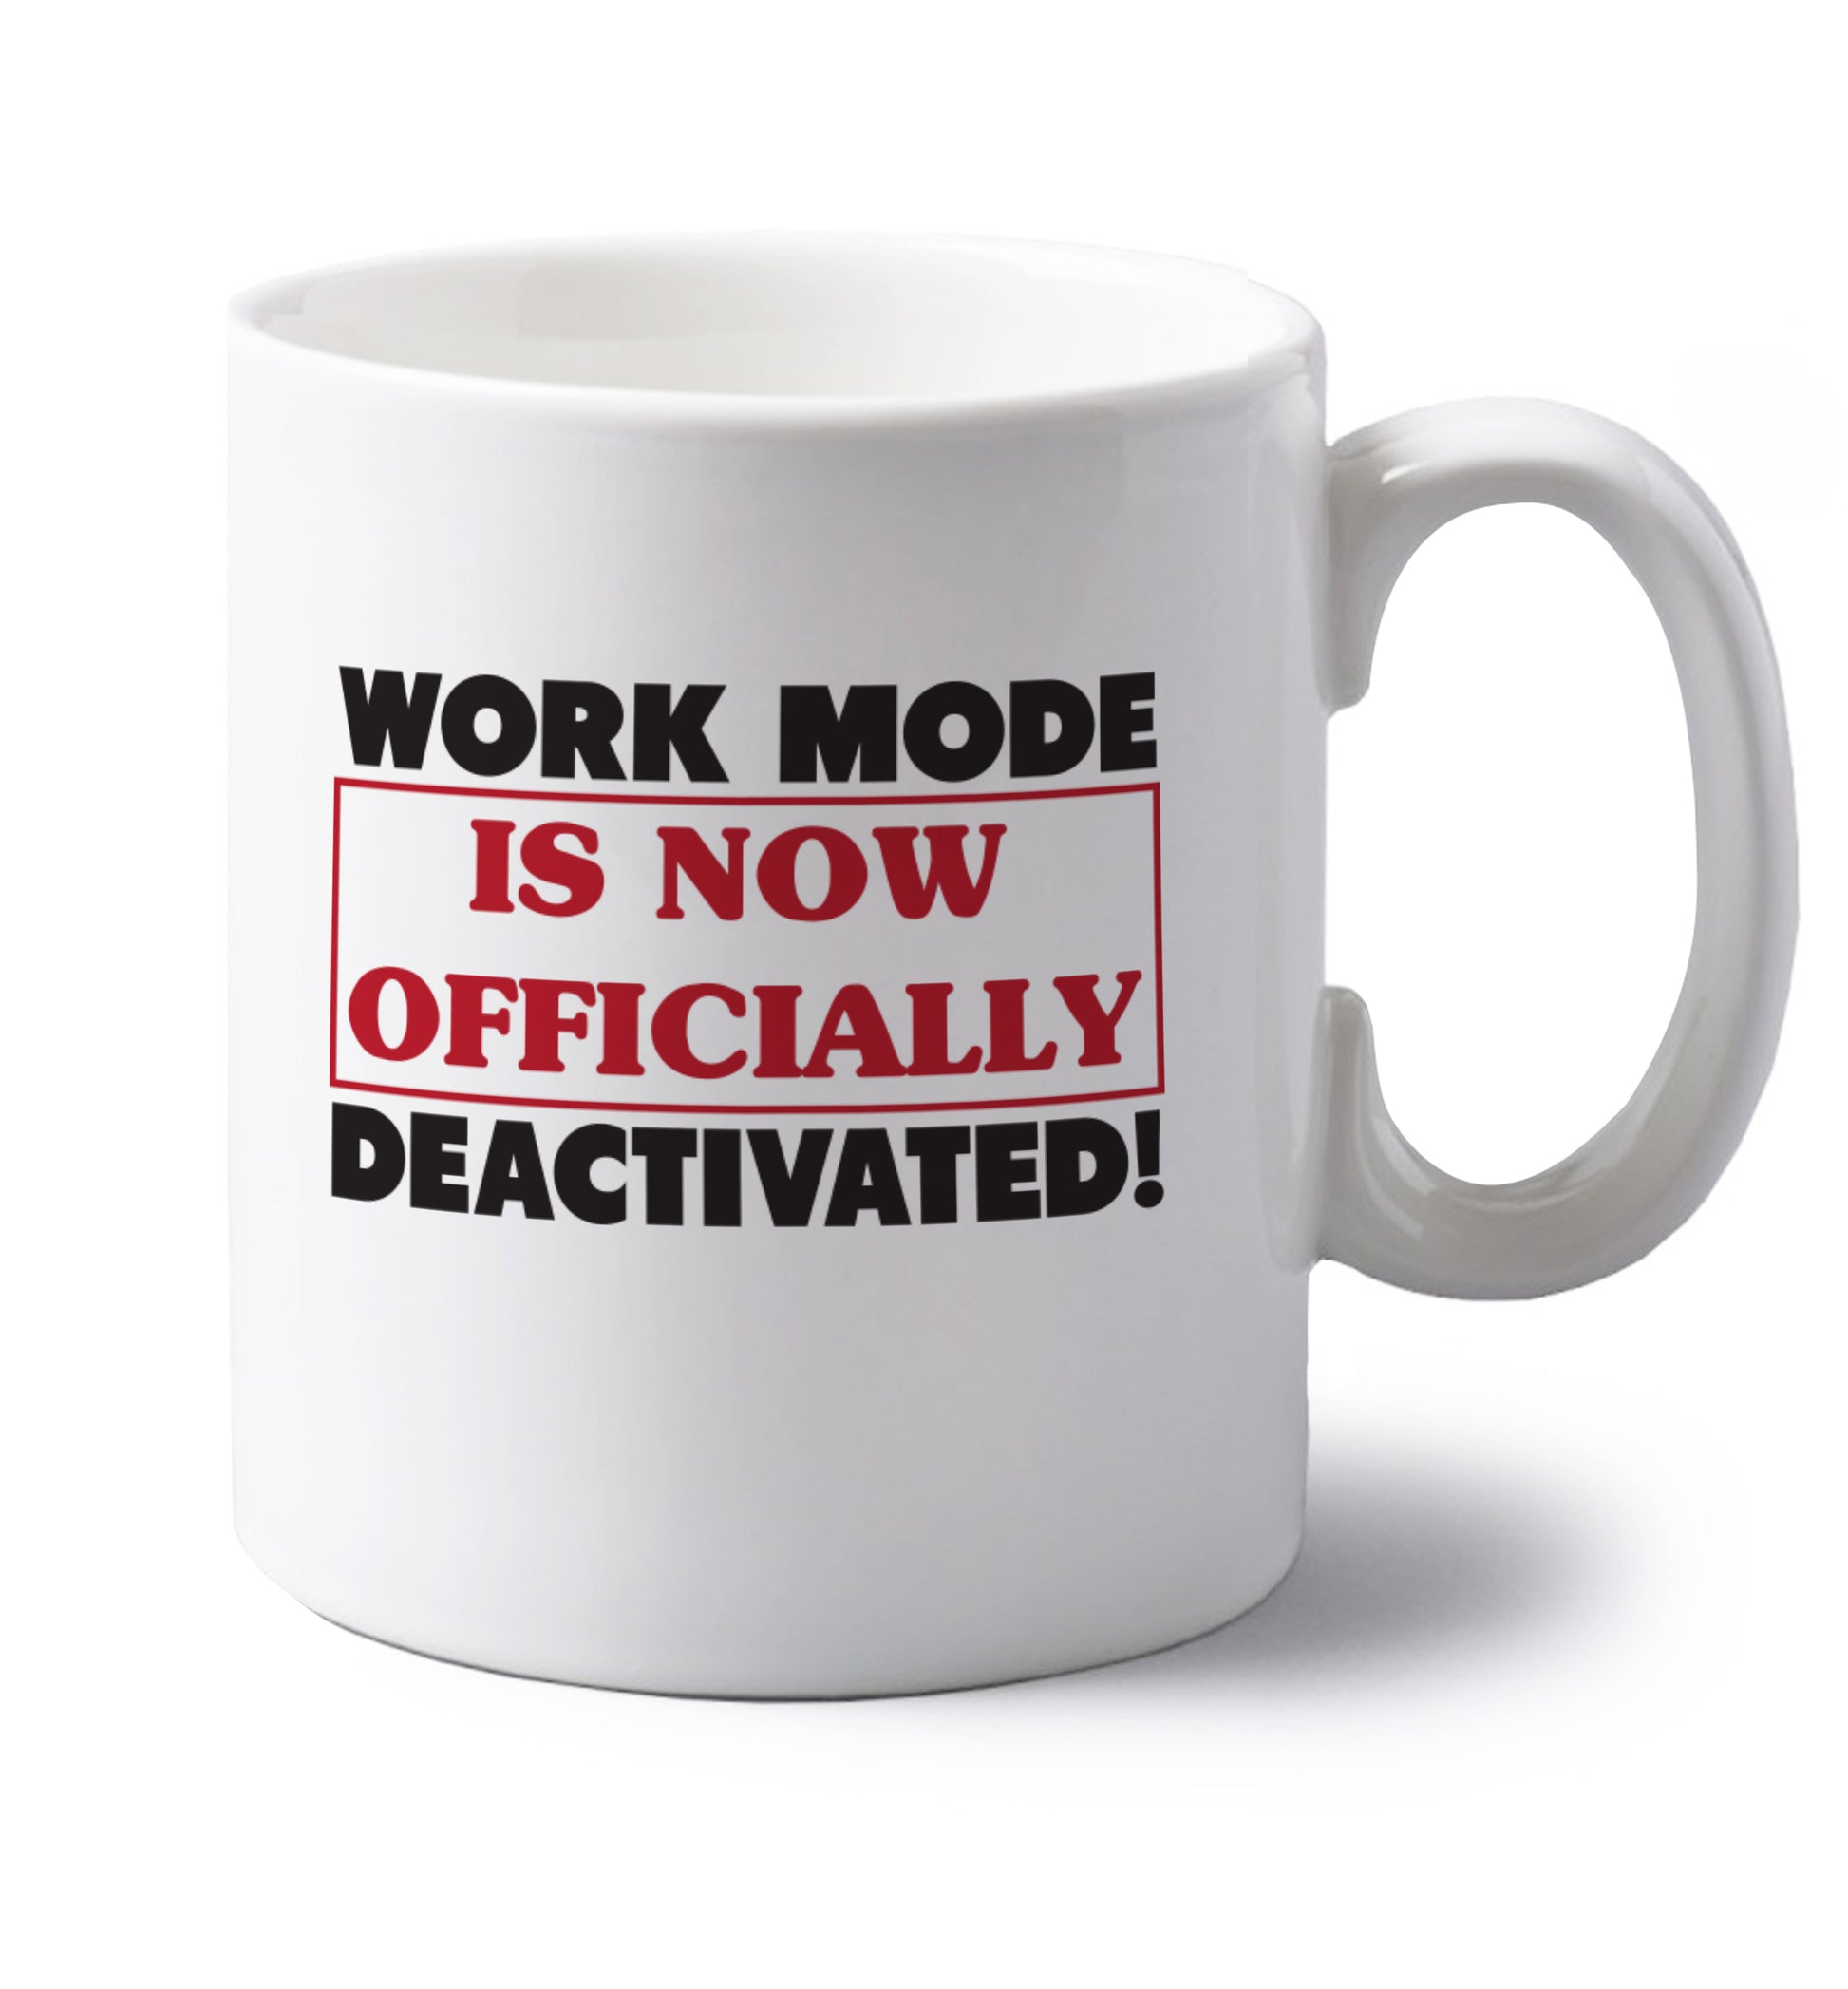 Work mode is now officially deactivated left handed white ceramic mug 